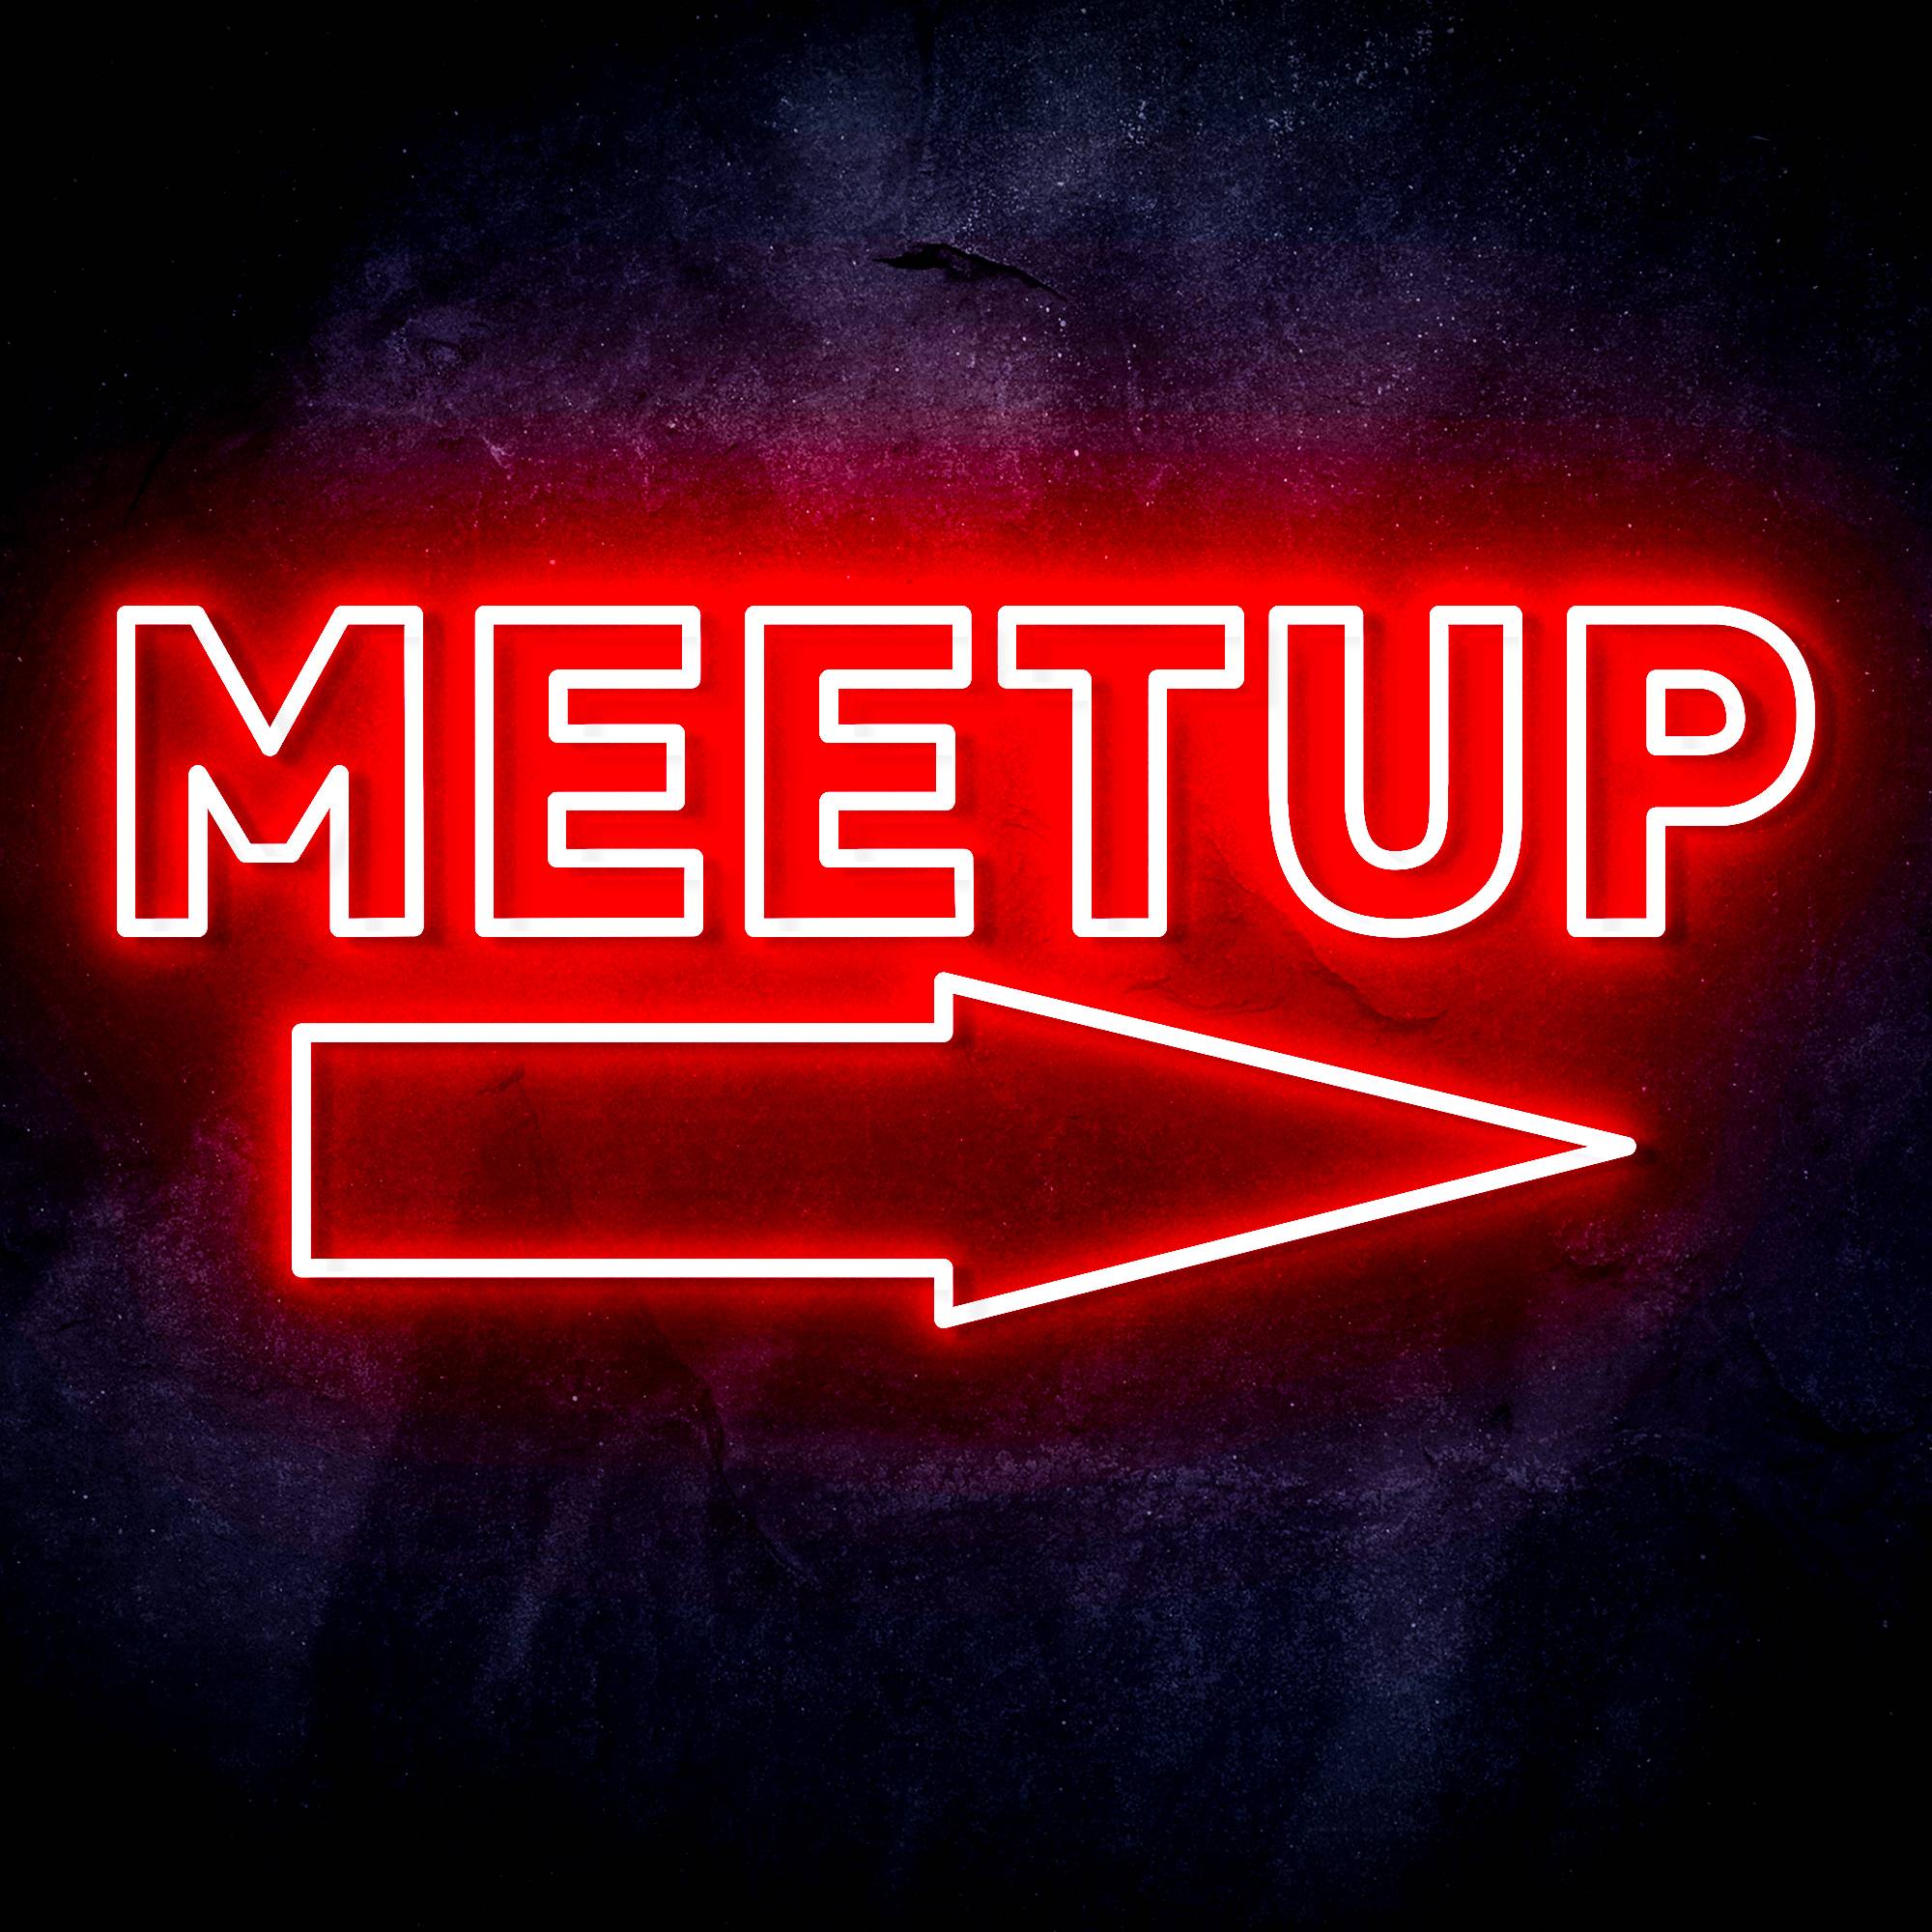 "MEETUP" with arrow LED Neon Sign